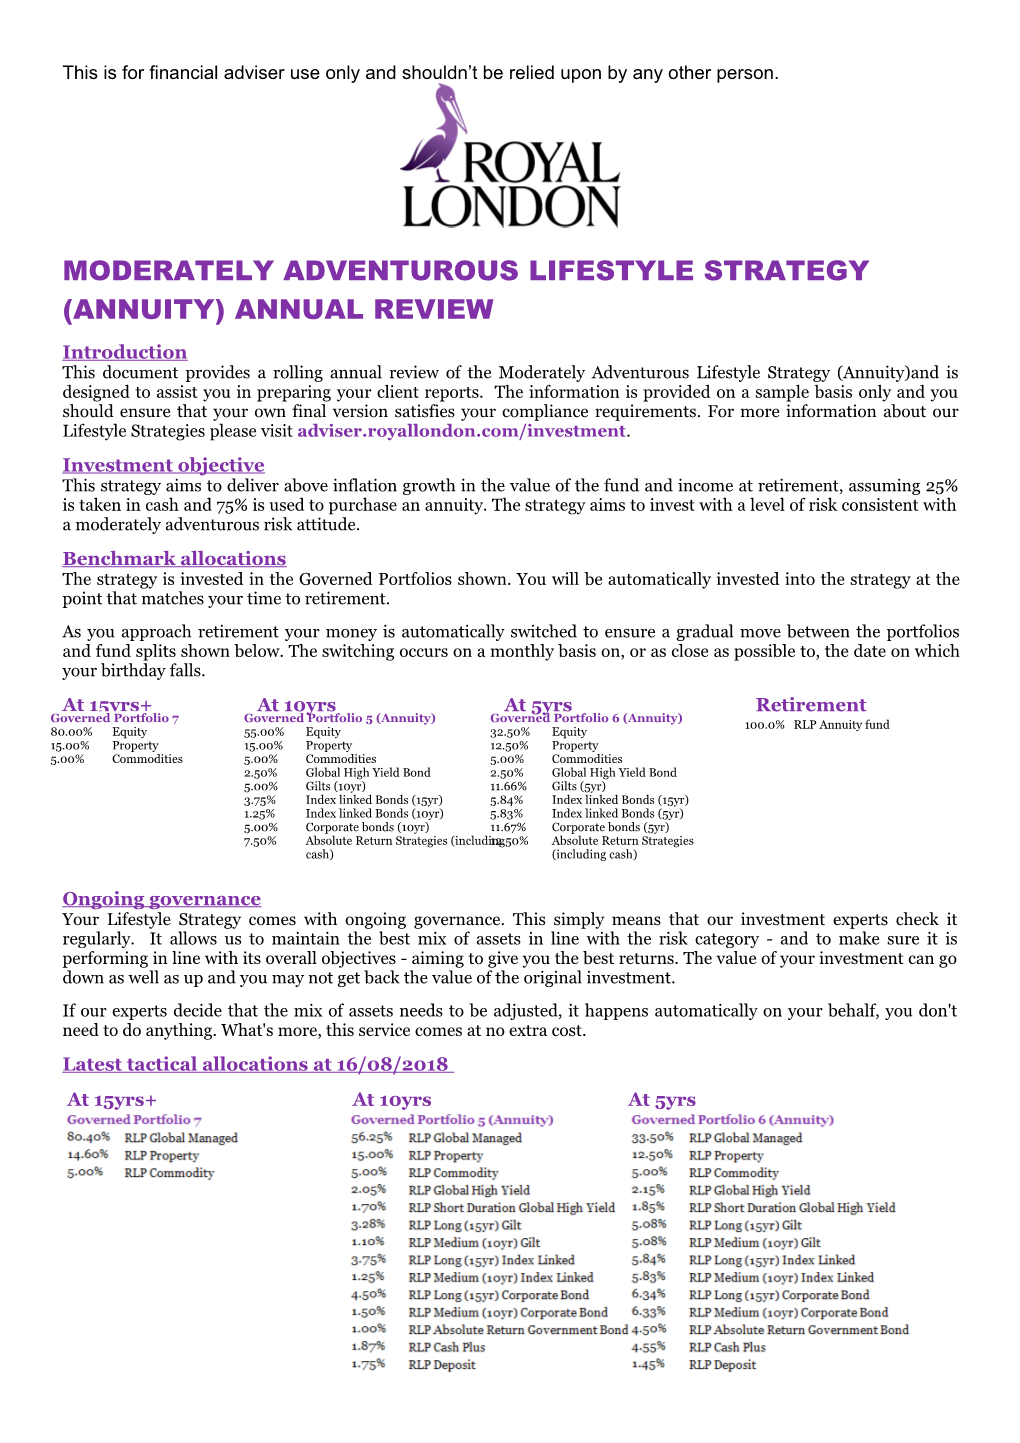 Moderately Adventurous Lifestyle Strategy - Annuity - Annual Review